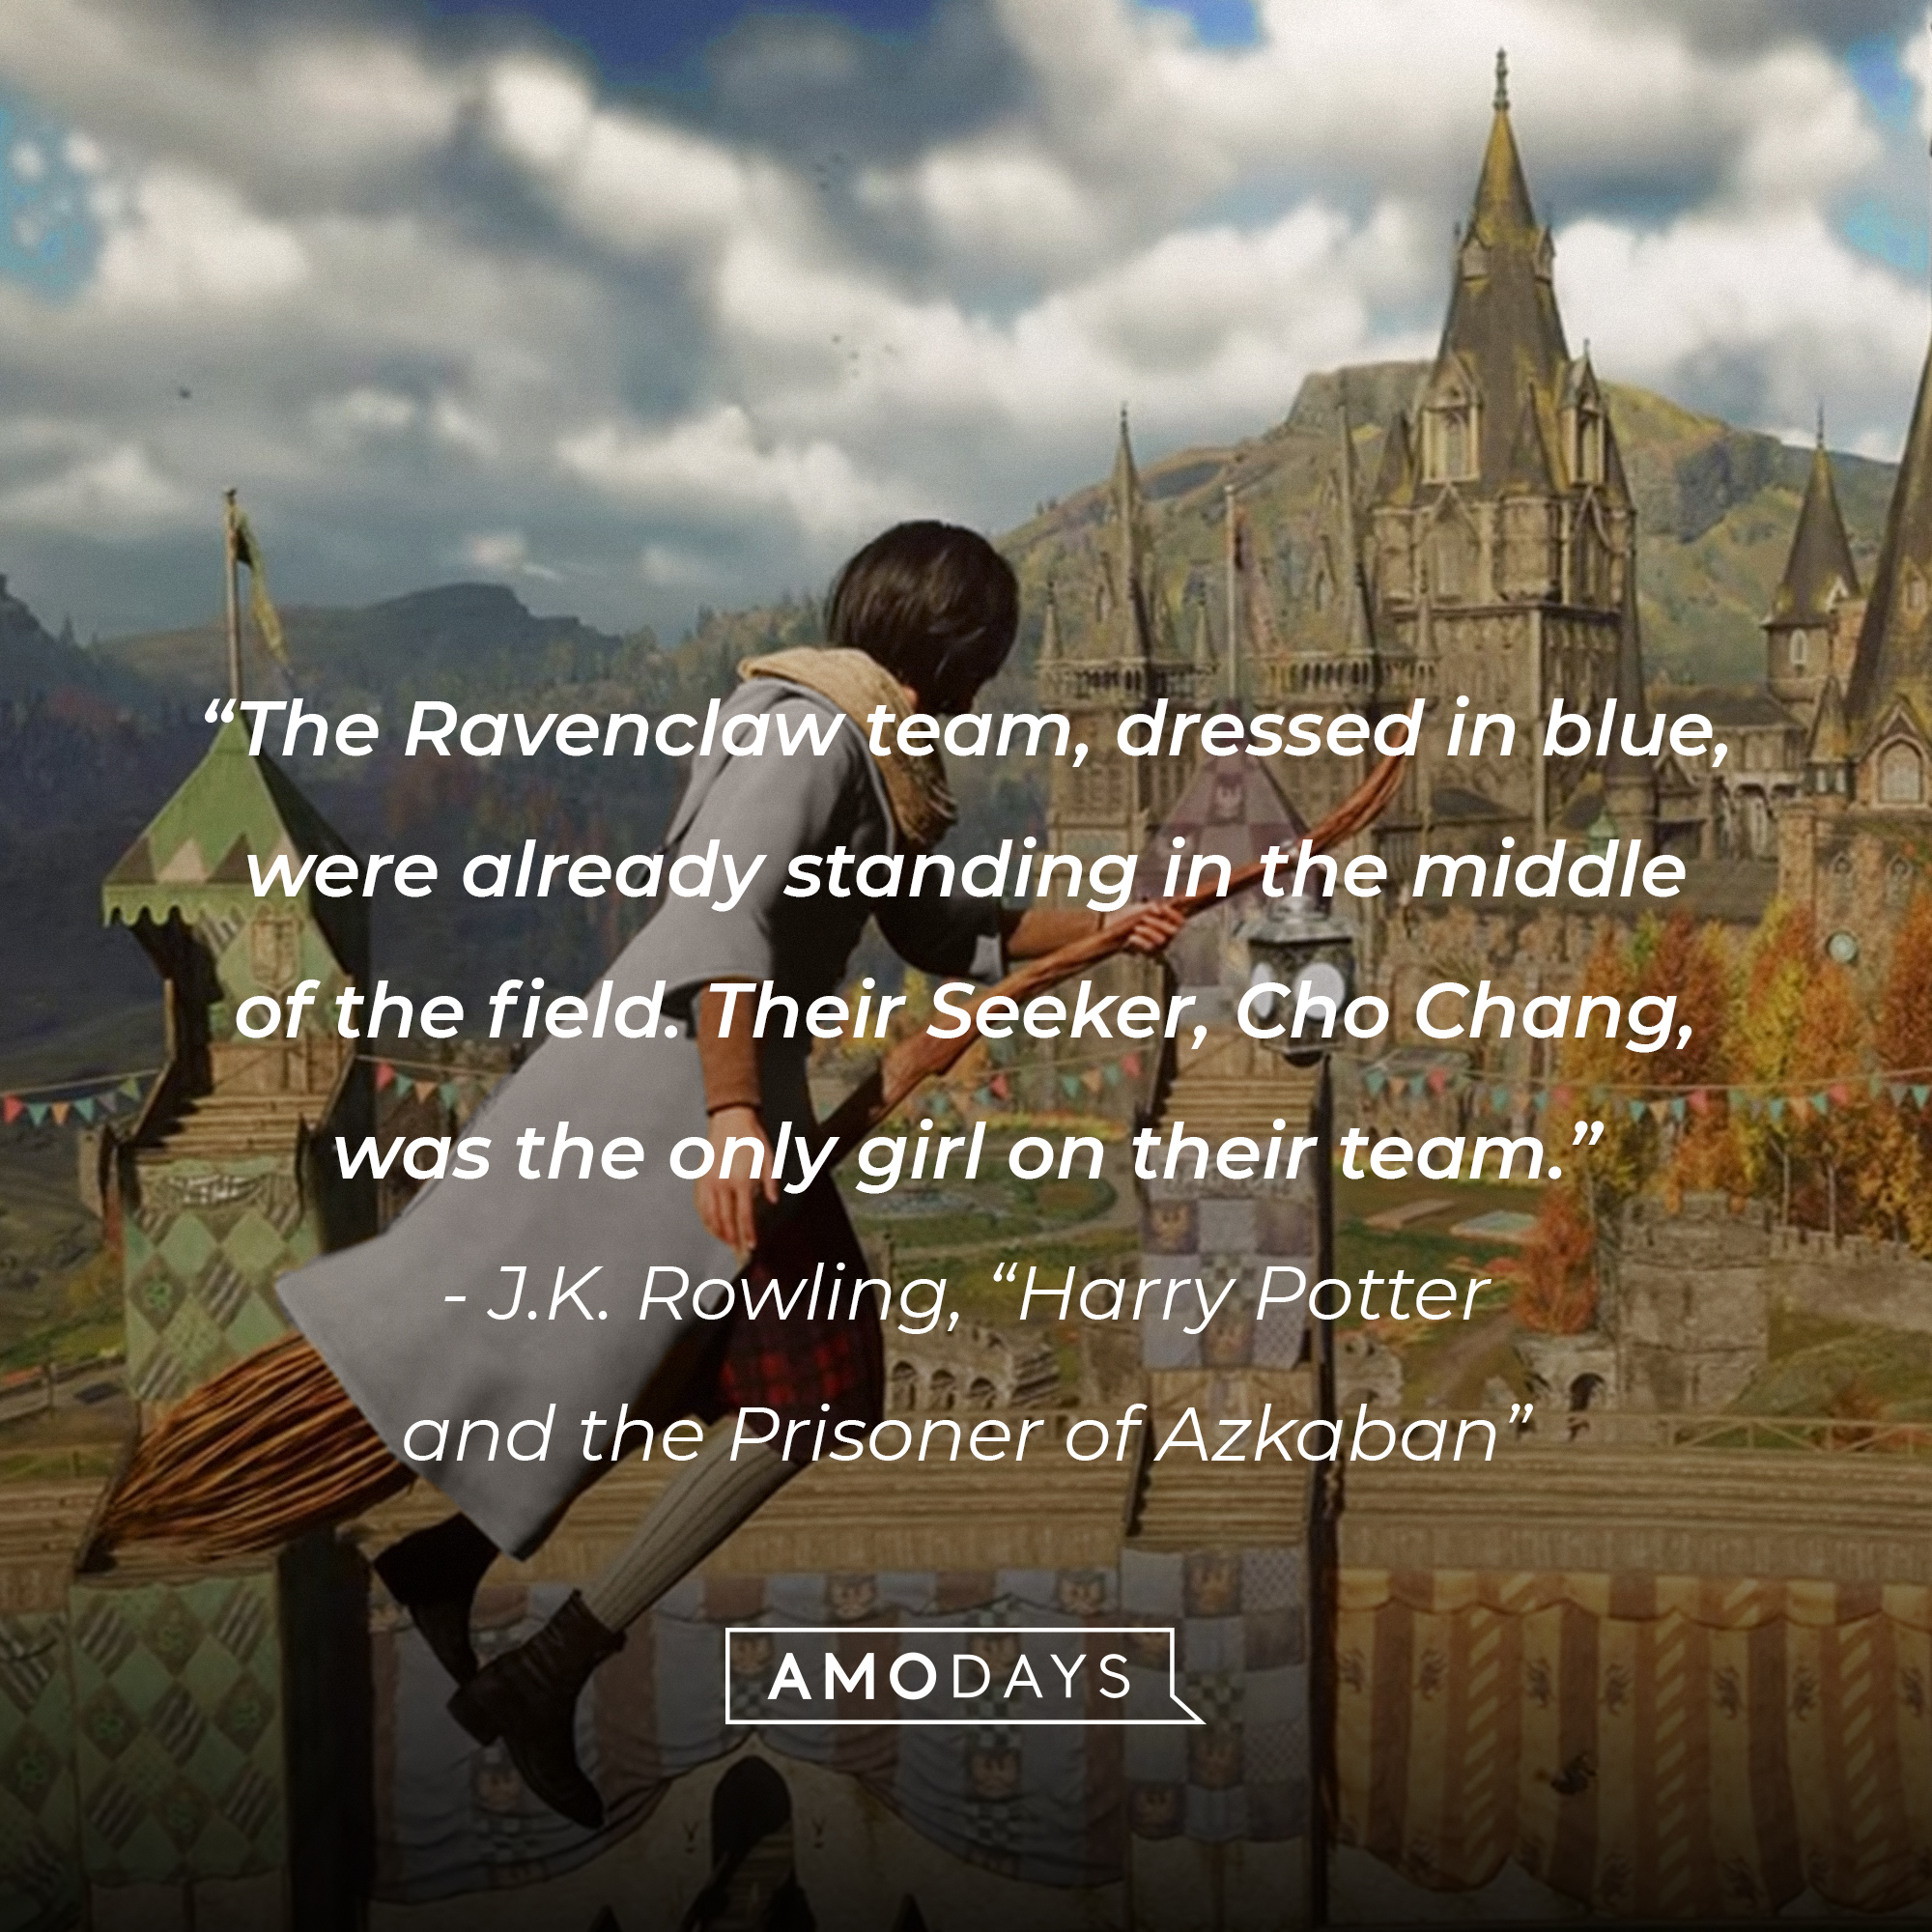 J.K. Rowling’s quote from “Harry Potter and the Prisoner of Azkaban” “The Ravenclaw team, dressed in blue, were already standing in the middle of the field. Their Seeker, Cho Chang, was the only girl on their team.” | Source: youtube.com/HogwartsLegacy